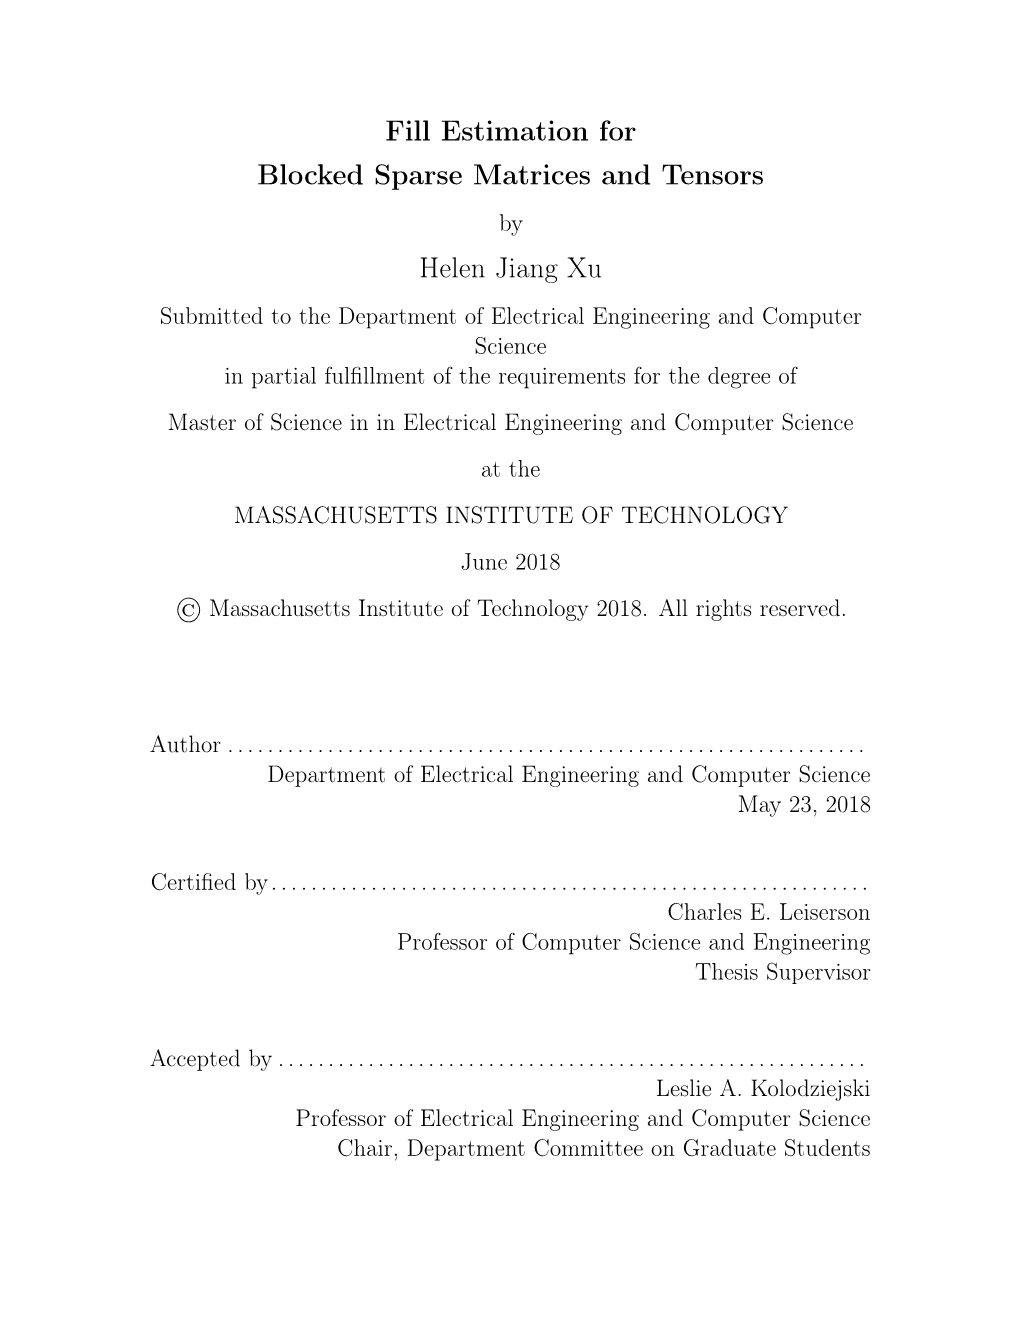 Fill Estimation for Blocked Sparse Matrices and Tensors Helen Jiang Xu